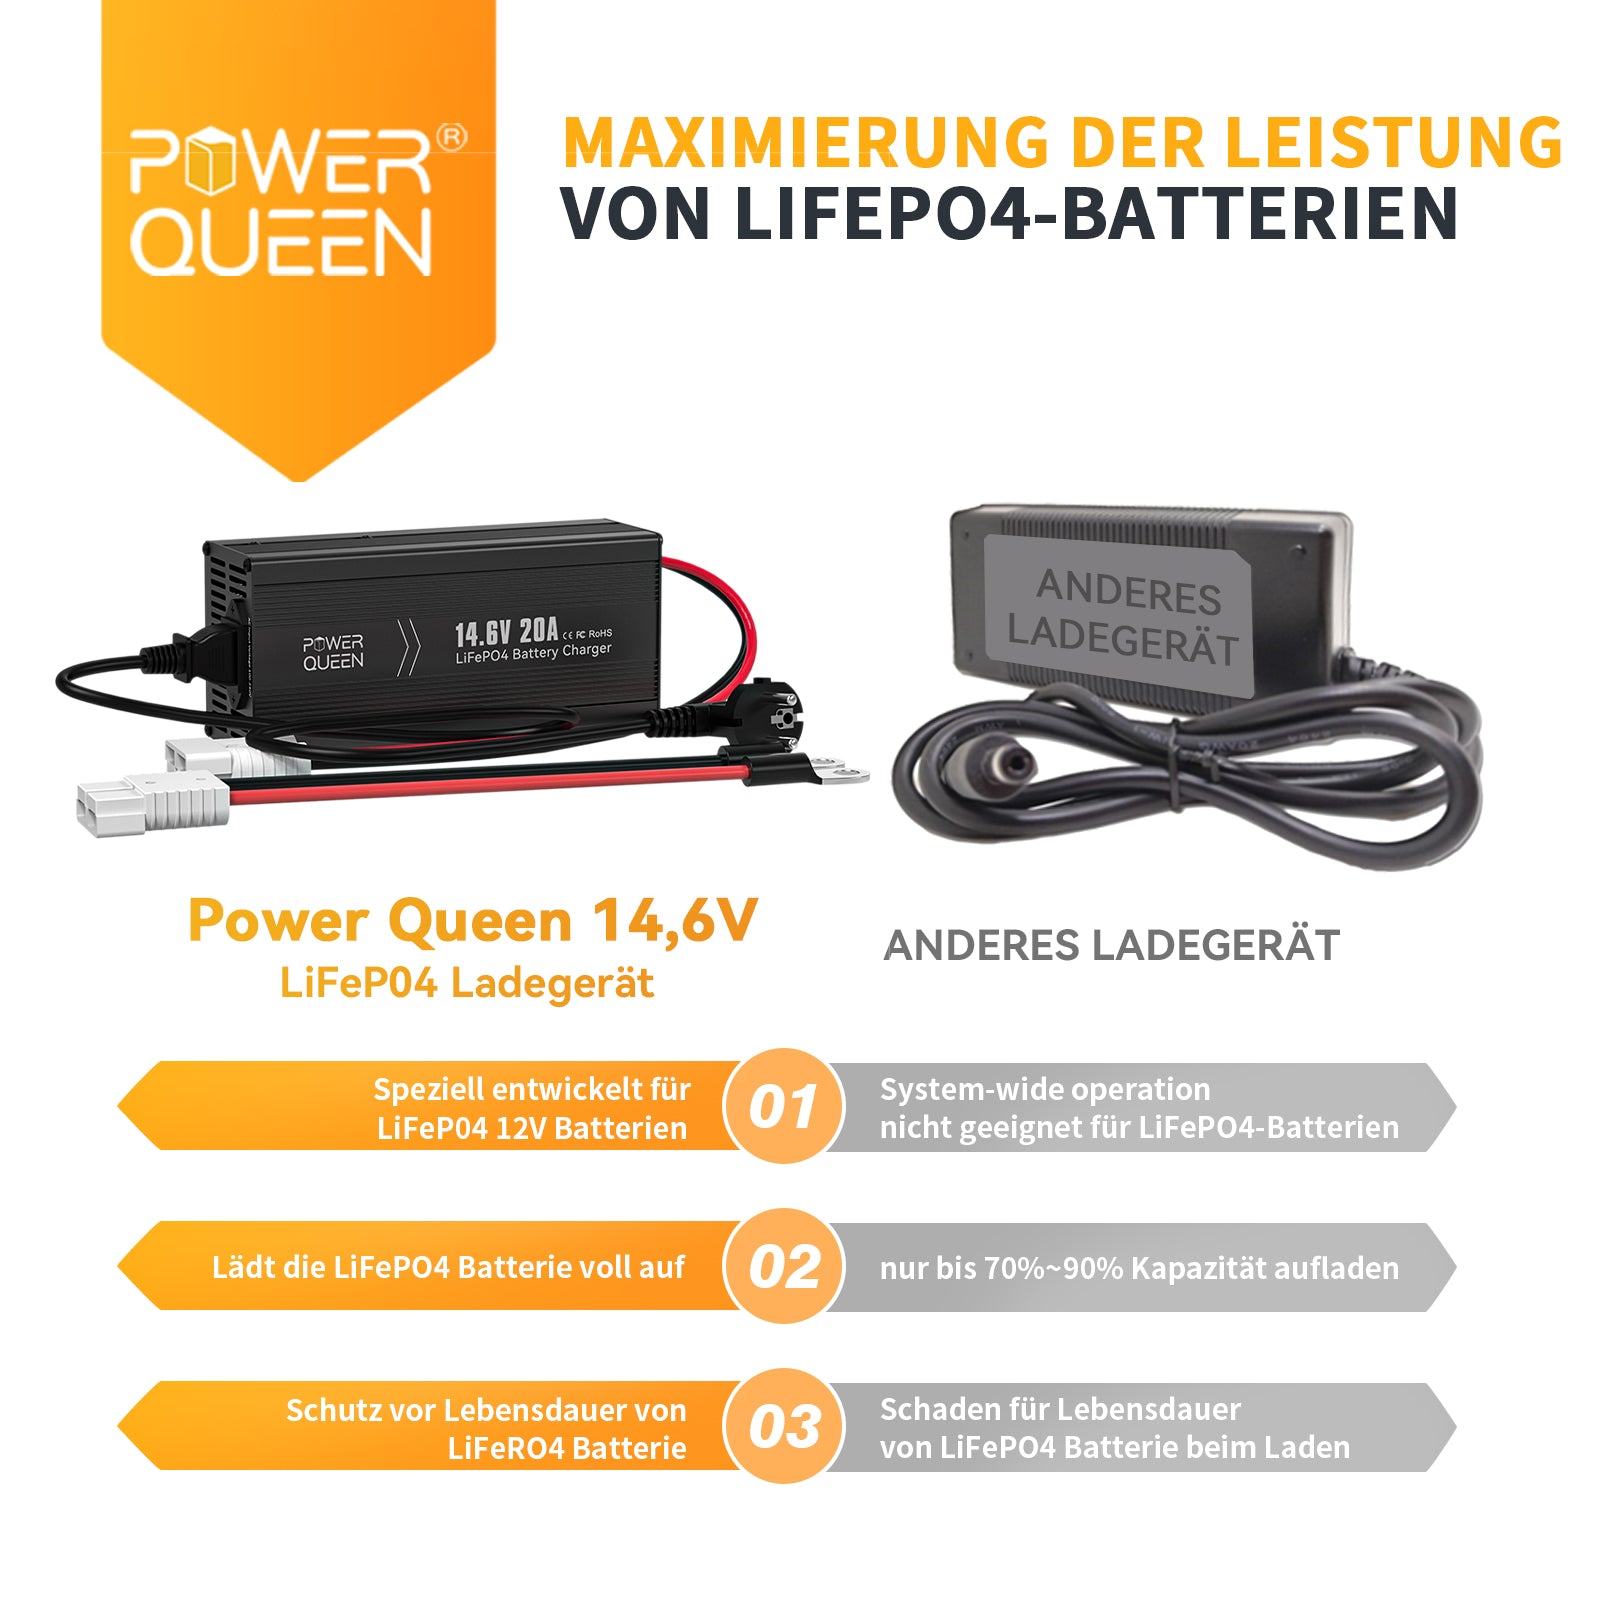 Chargeur Power Queen 14,6V 20A LiFePO4 pour batterie 12V LiFePO4